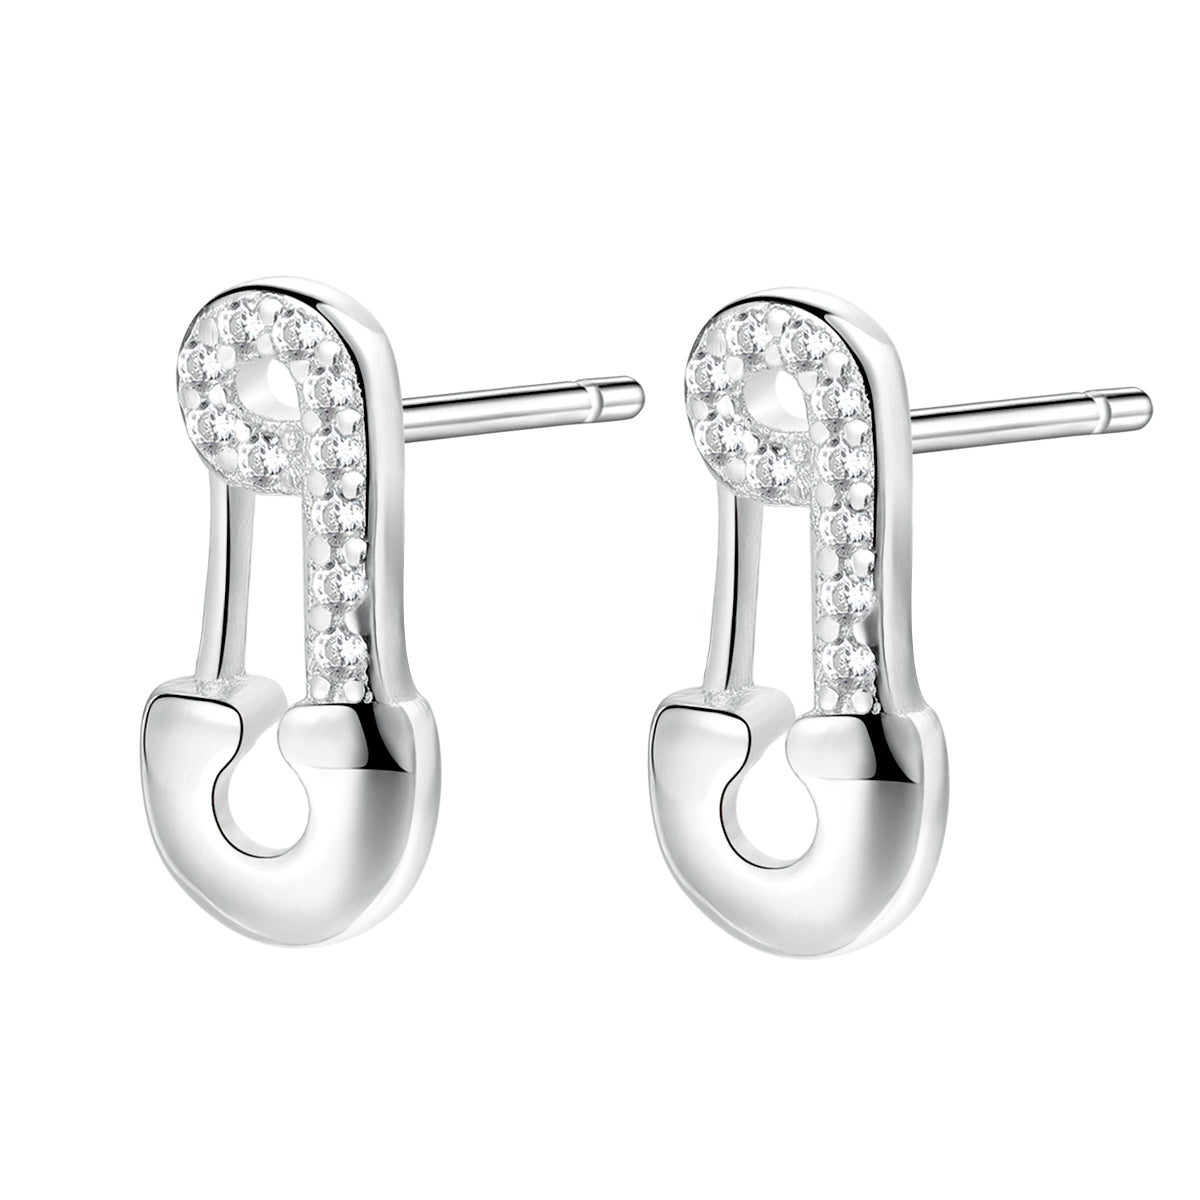 Safety Pin Stud Earrings Sterling Silver